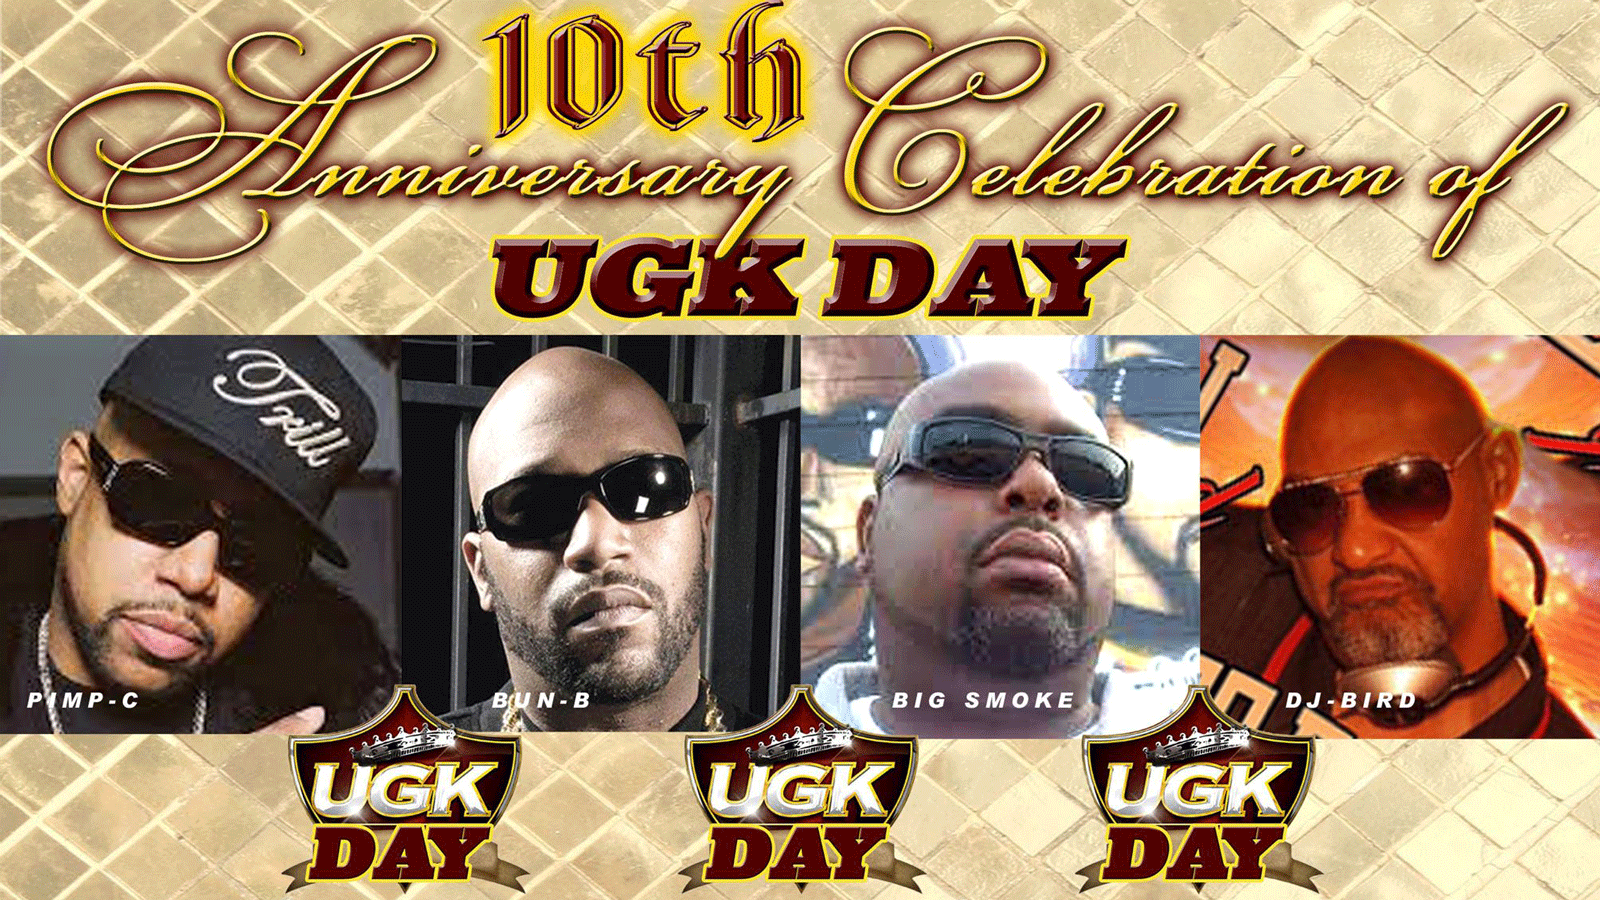 UGK day flyer for a celebration in downtown port arthur texas